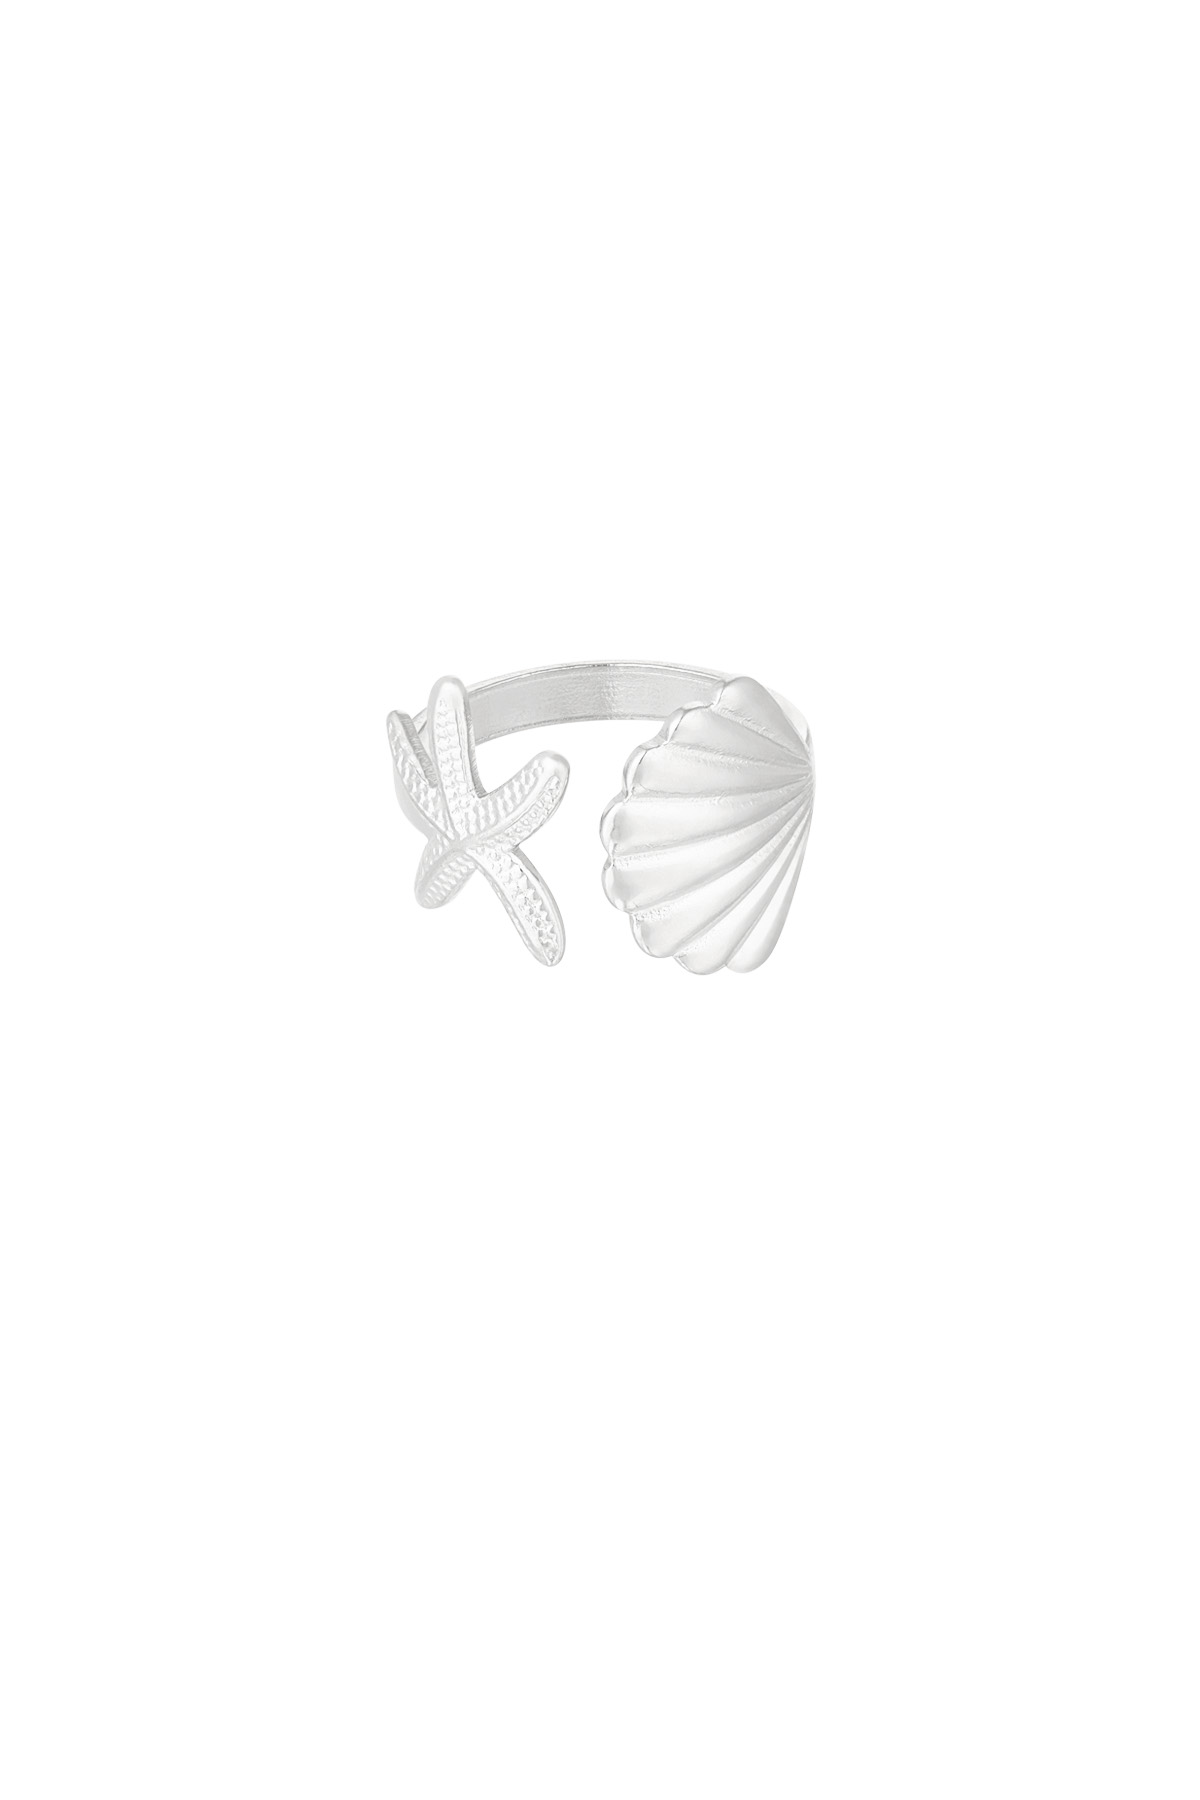 Ring sea shell vibes - silver h5 